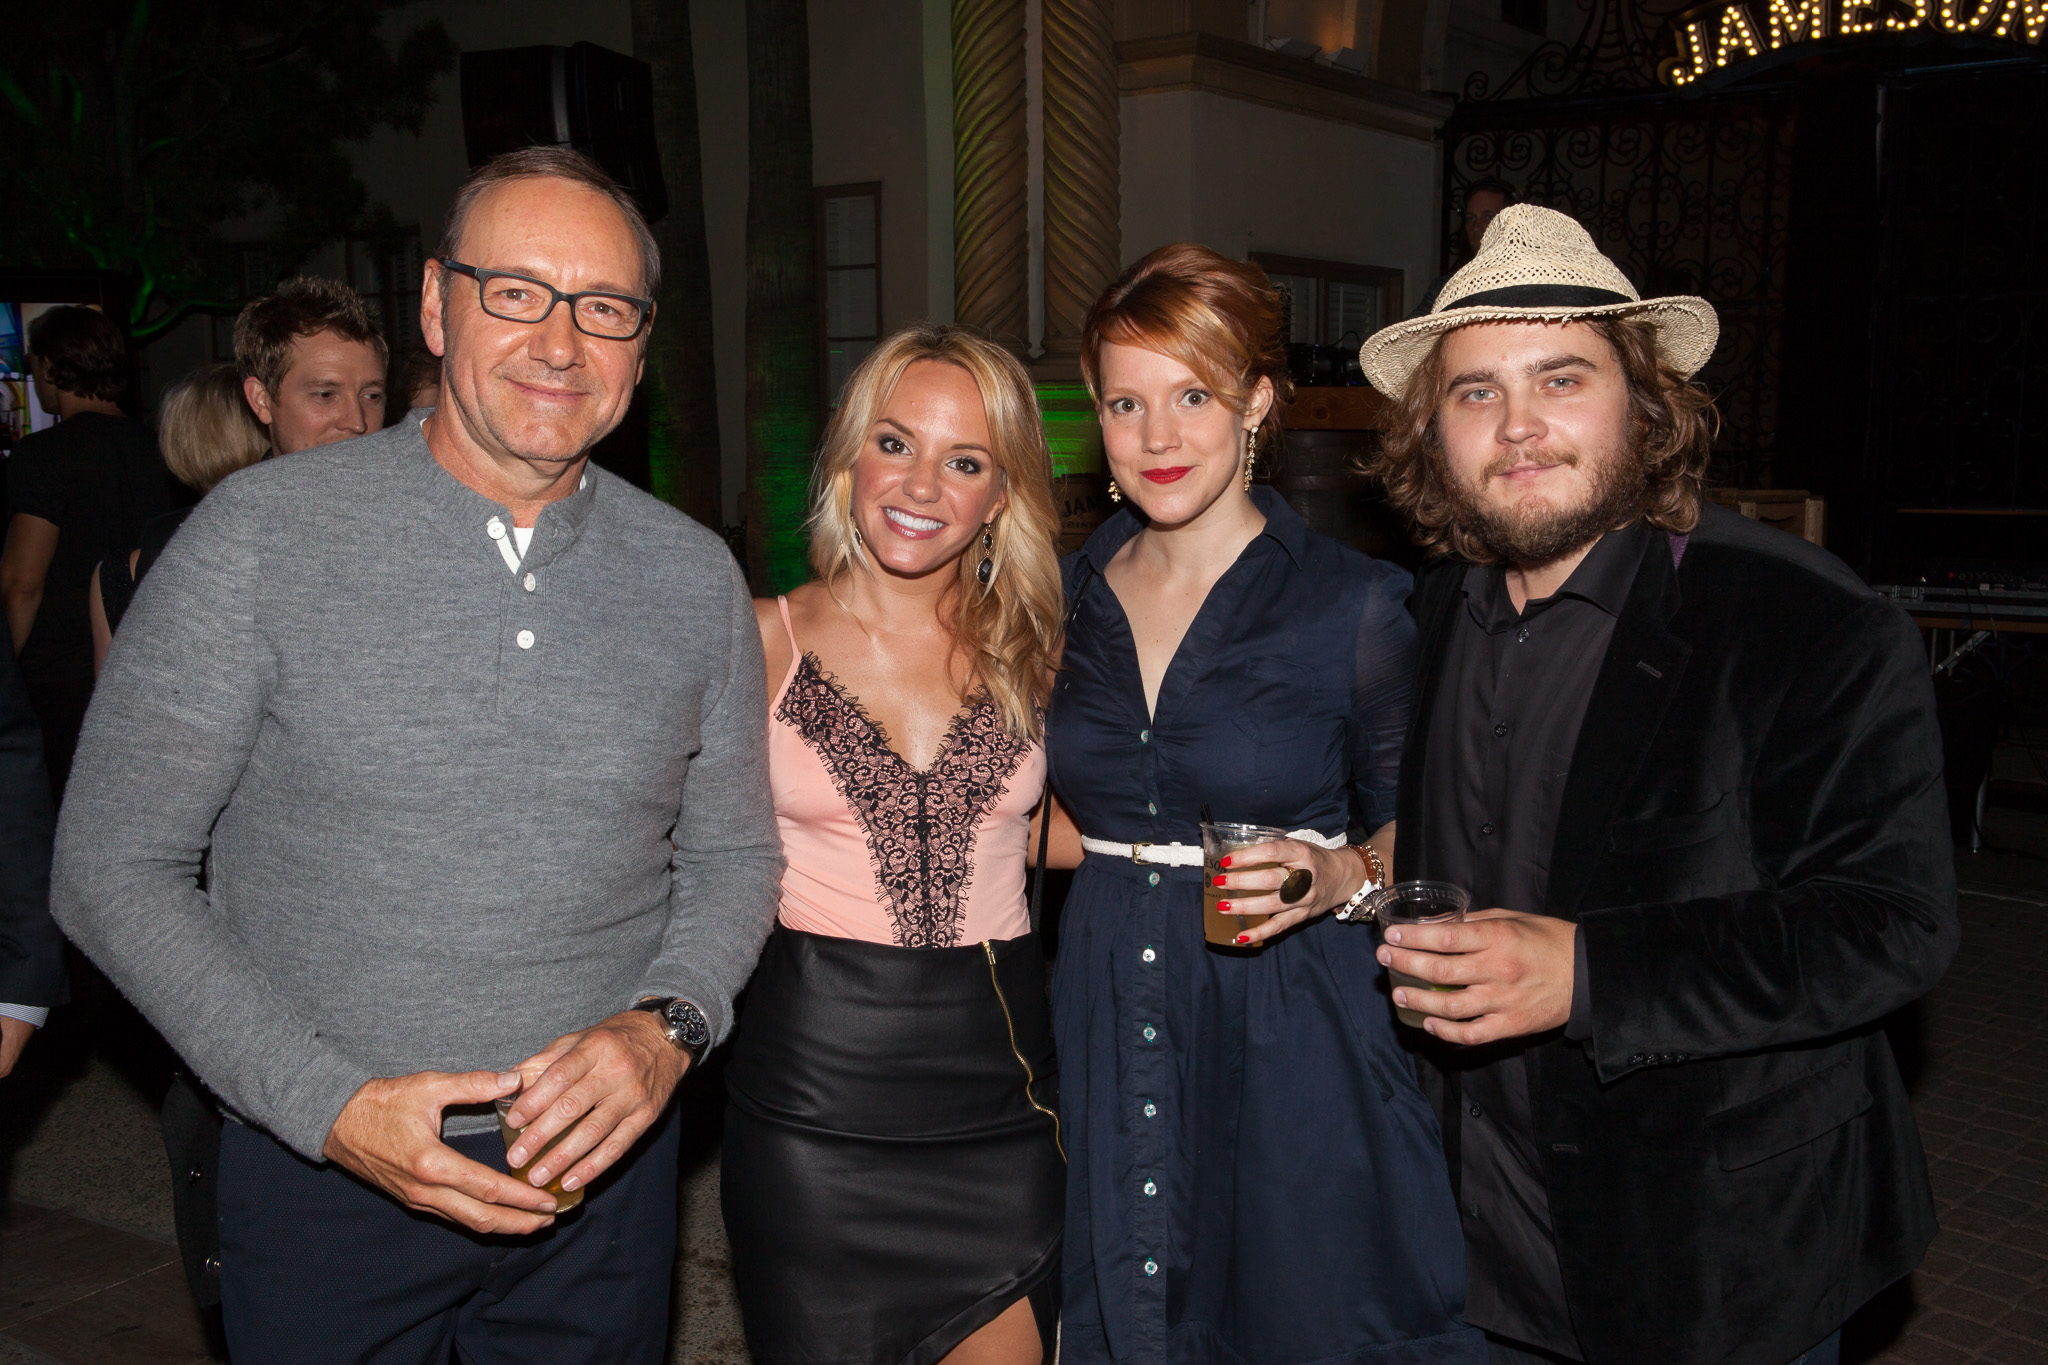 Producer Kevin Spacey and the rest of the cast of The Library Book. Cheryl Texiera, Nina Rausch and Bjørn Alexander